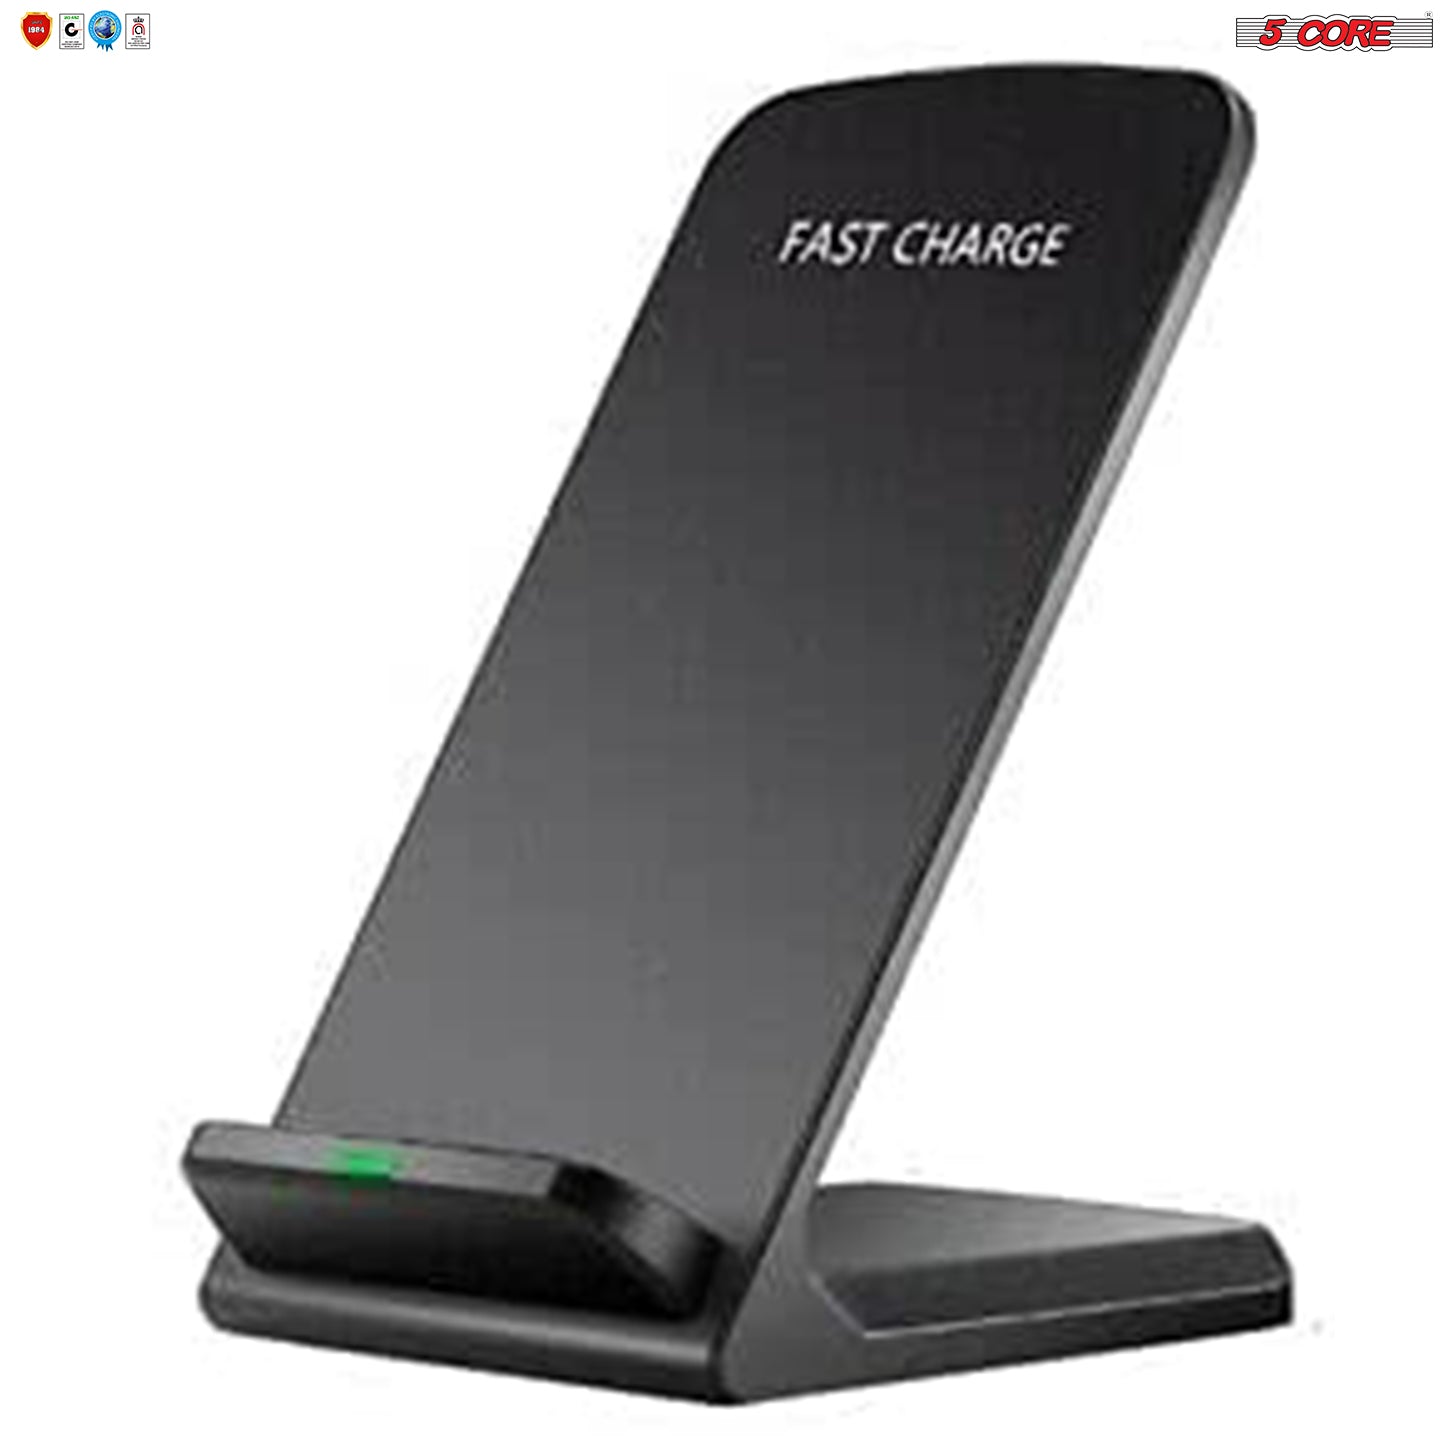 Kcubeinc Wireless Charger Charging Pad Fast Phone Charging Stand Dock 10W Black